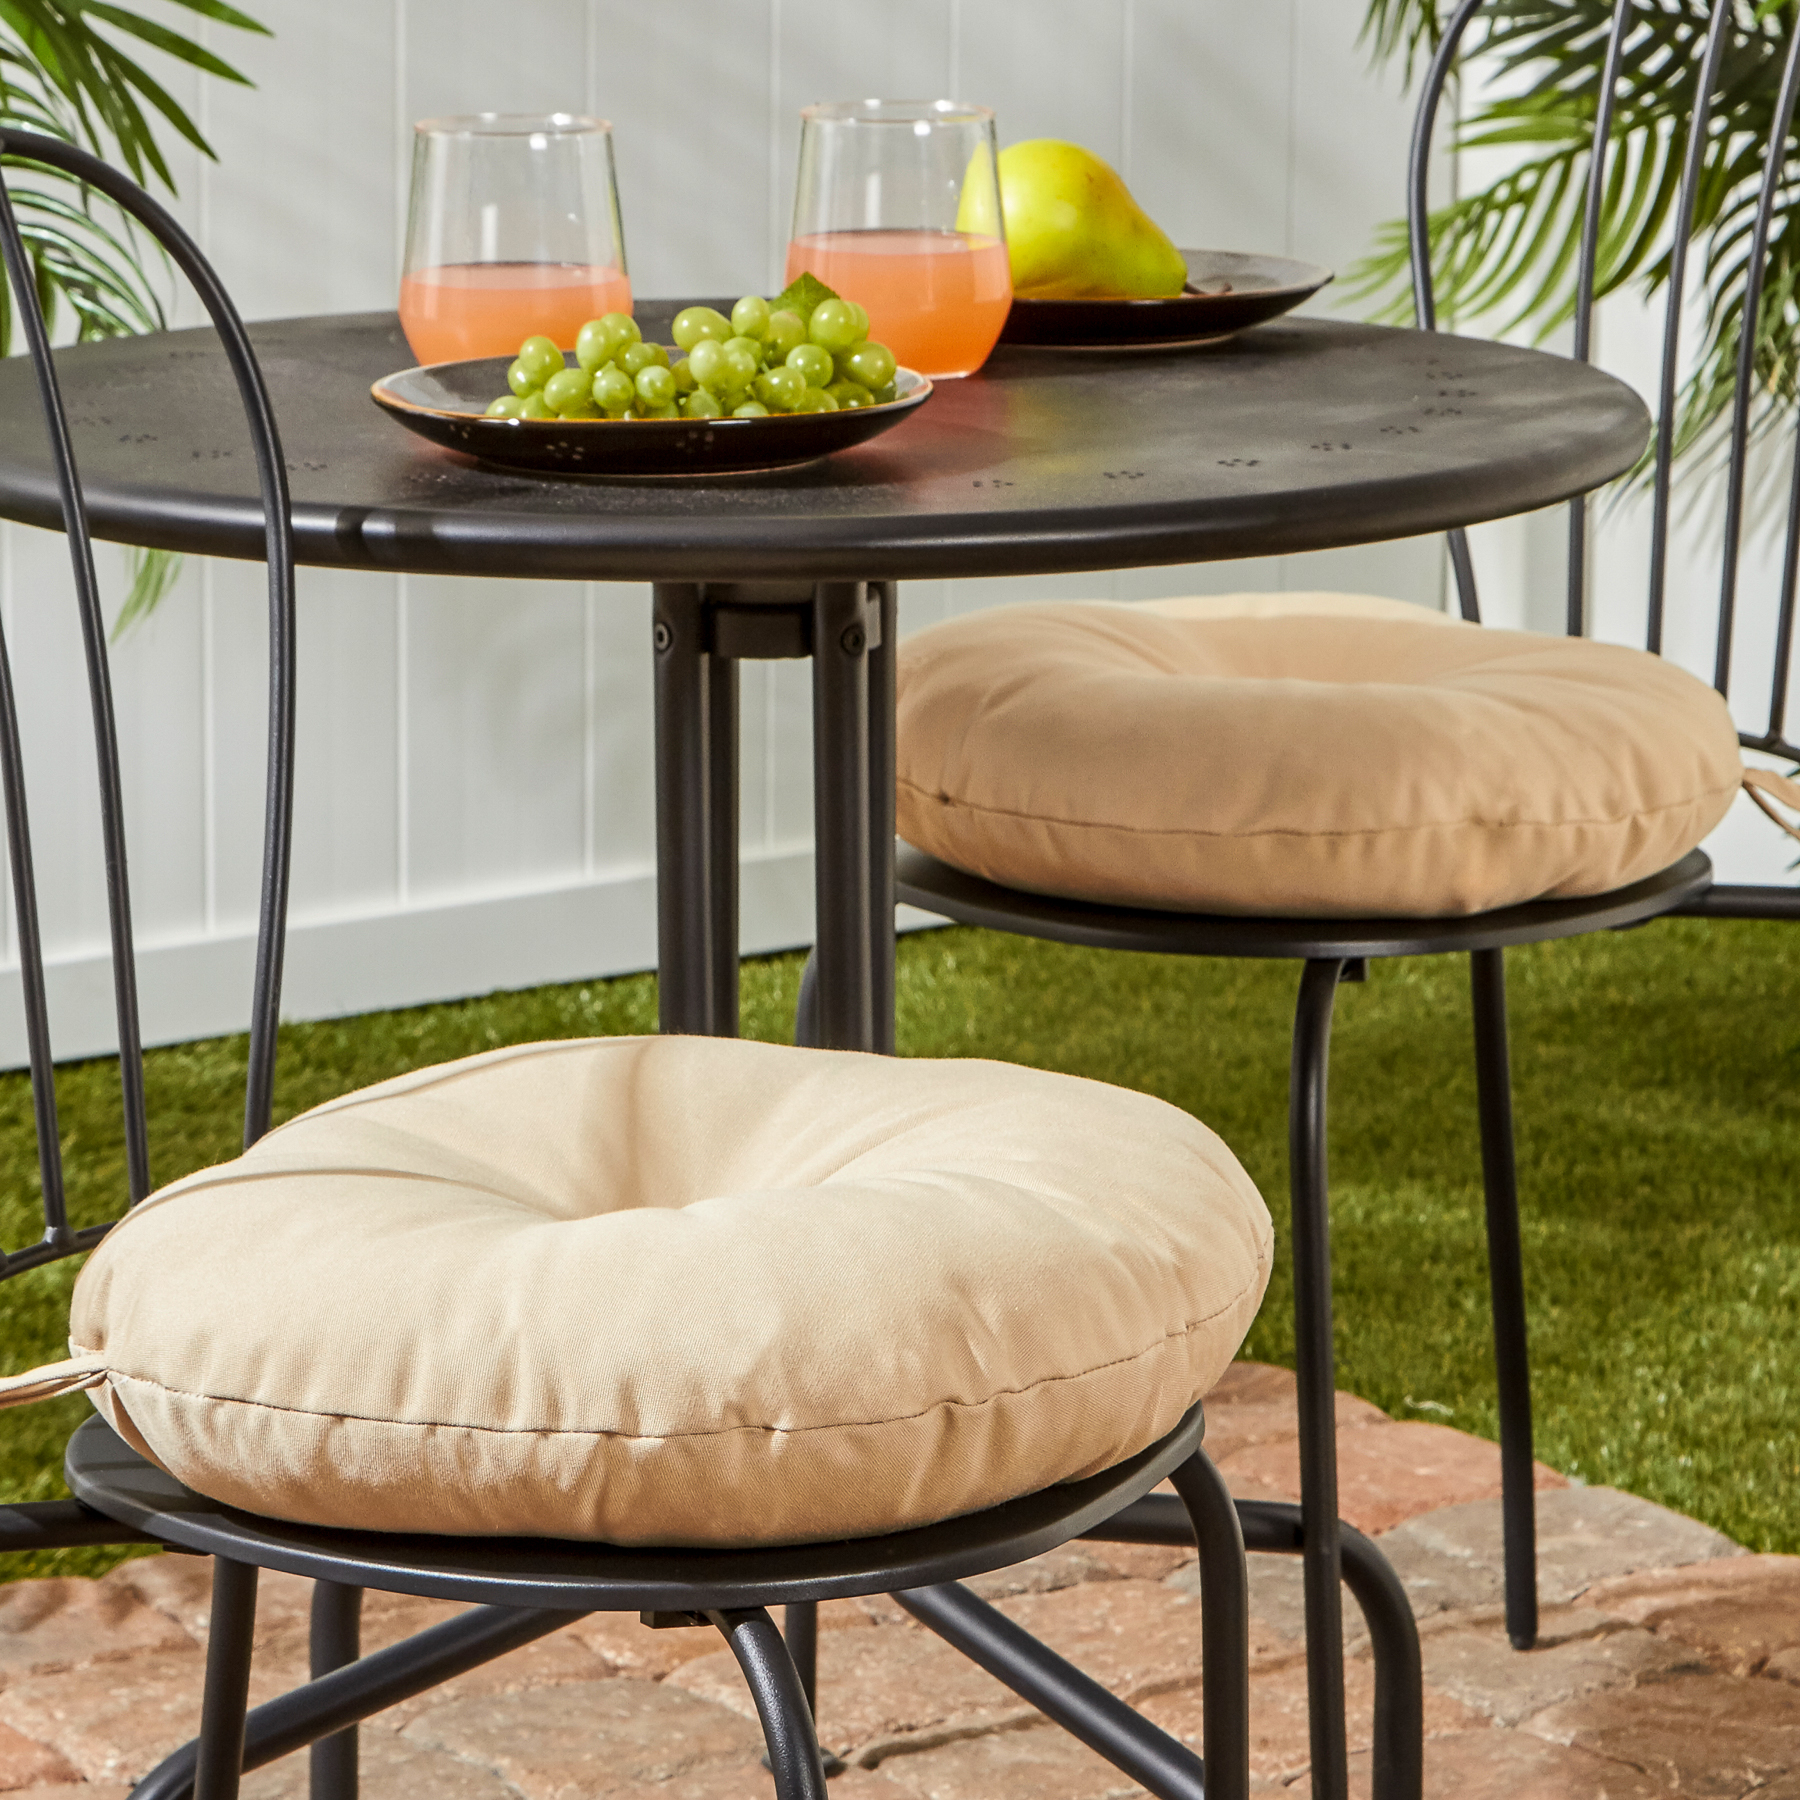 Greendale Home Fashions Stone 15 in. Round Outdoor Reversible Bistro Seat Cushion (Set of 2) - image 3 of 6